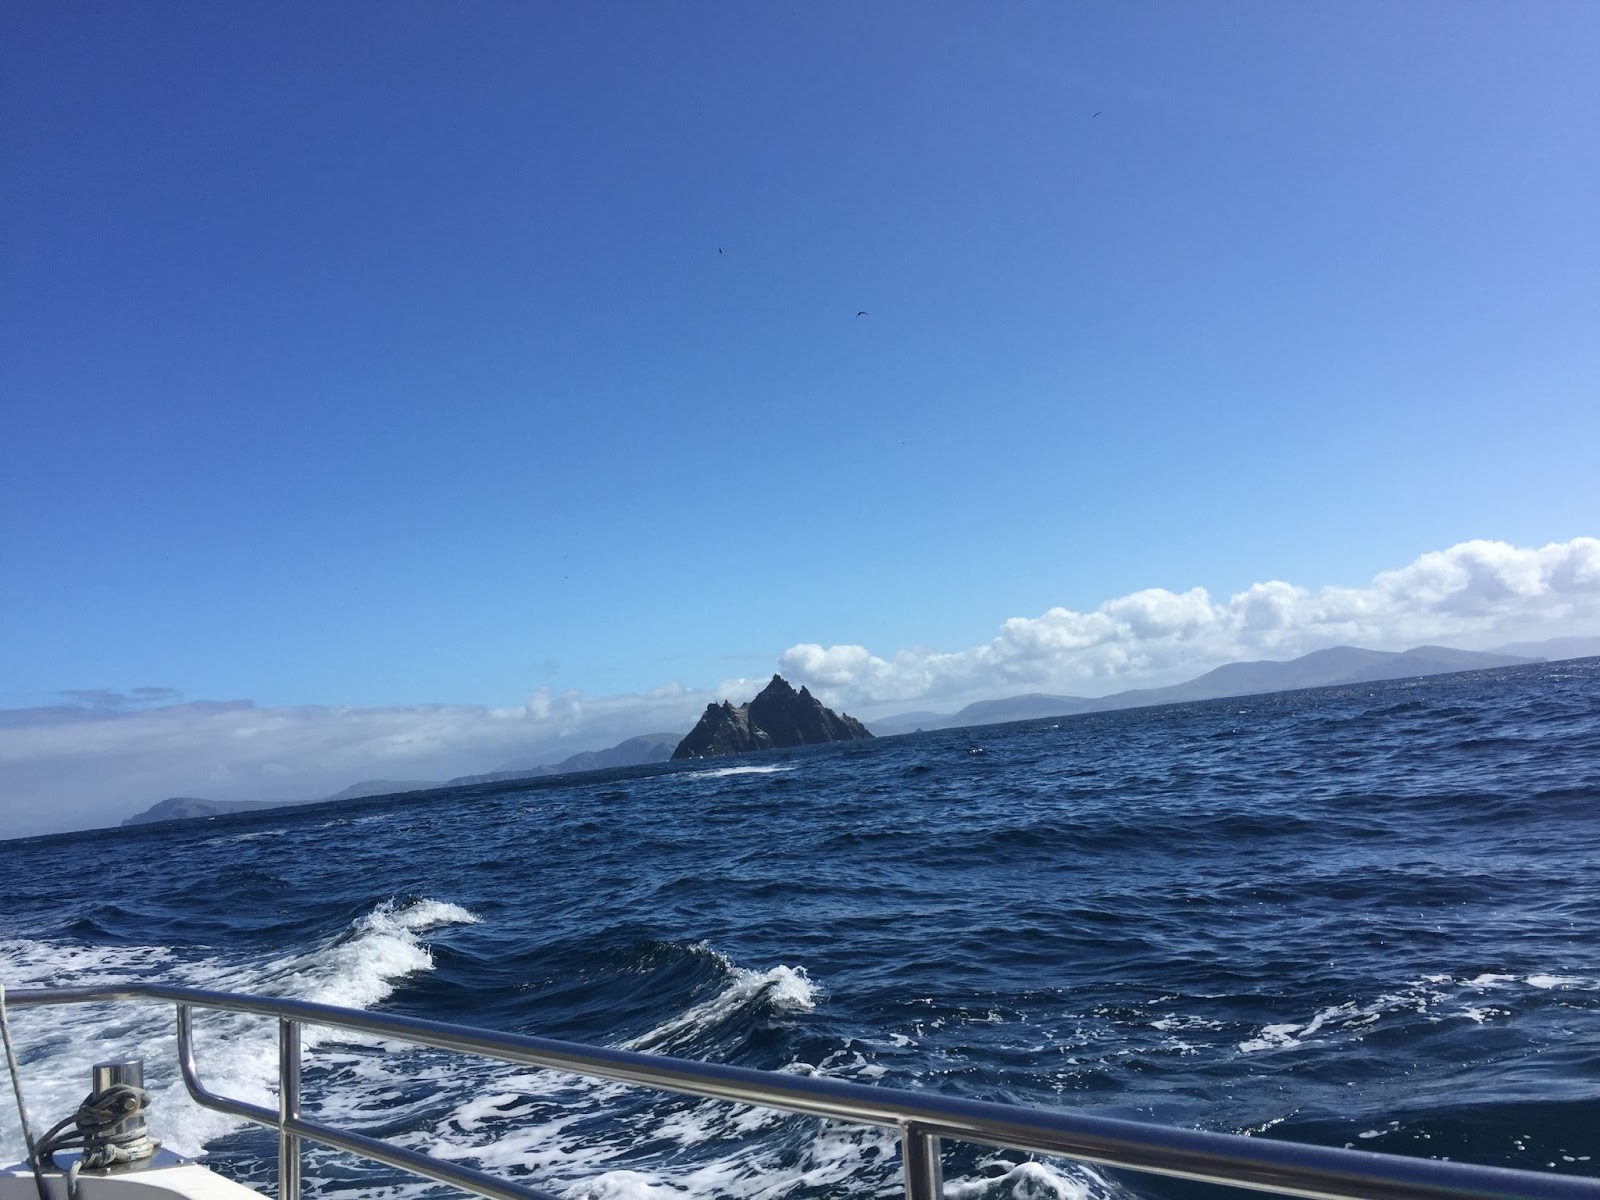 The Skelligs can be seen in the middle distance, jagged rocks rising out of the deep blue sea. The sky is blue with some light fluffy clouds along the horizon. The boat from which the photo is taken appears in the foreground, and the horizon slopes to the left of the photo.